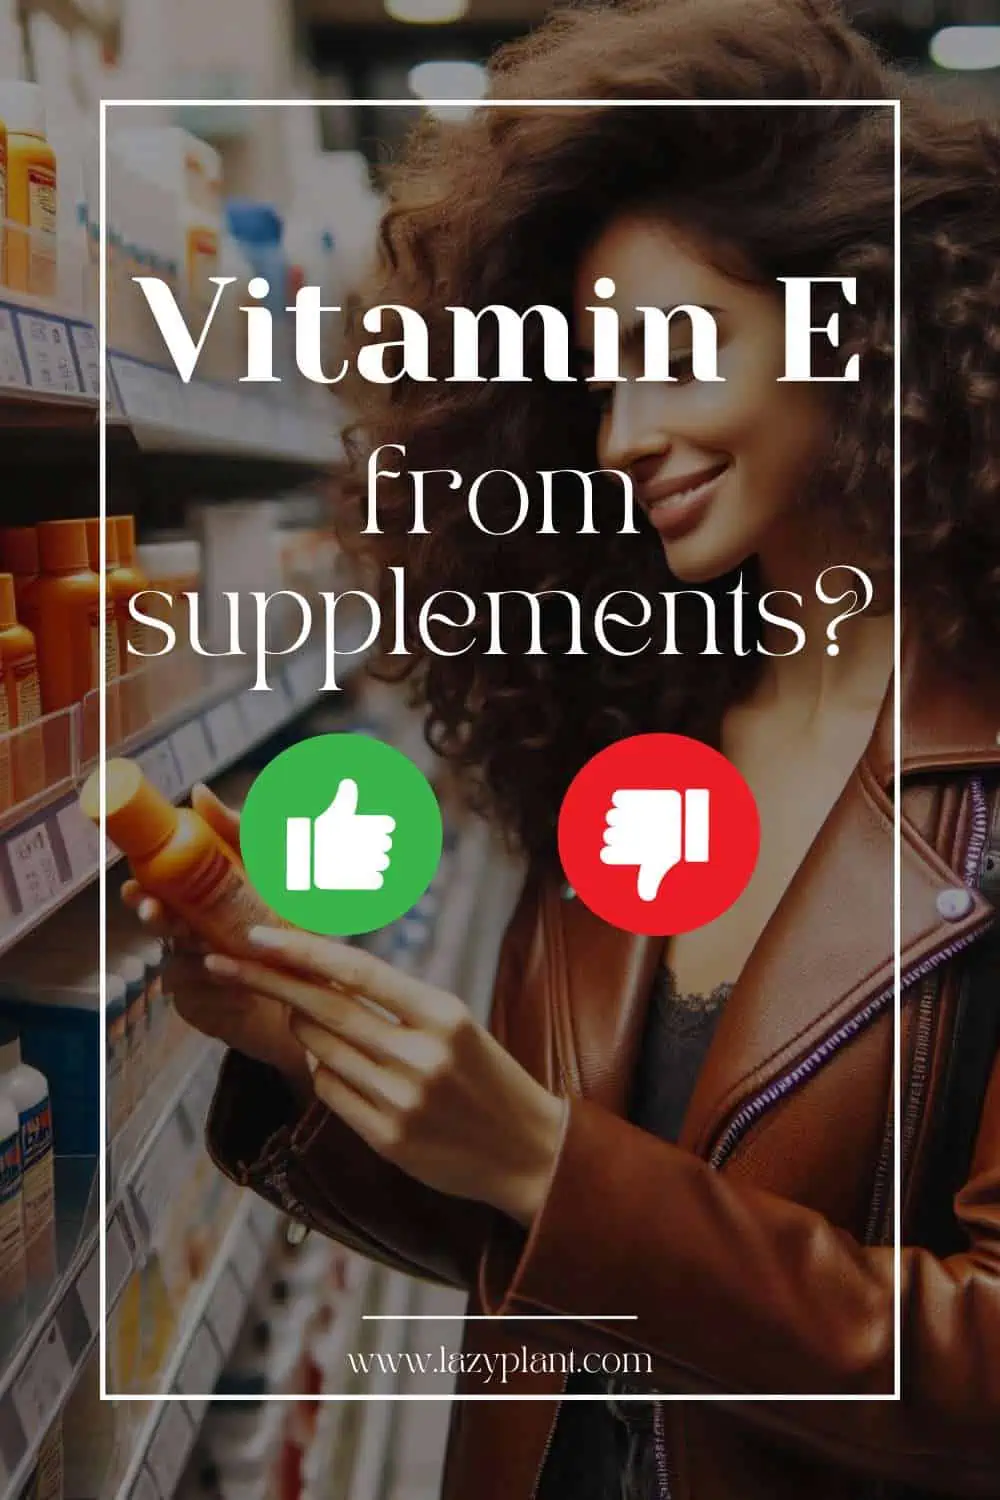 Vitamin E: Is it safe to get it from supplements?